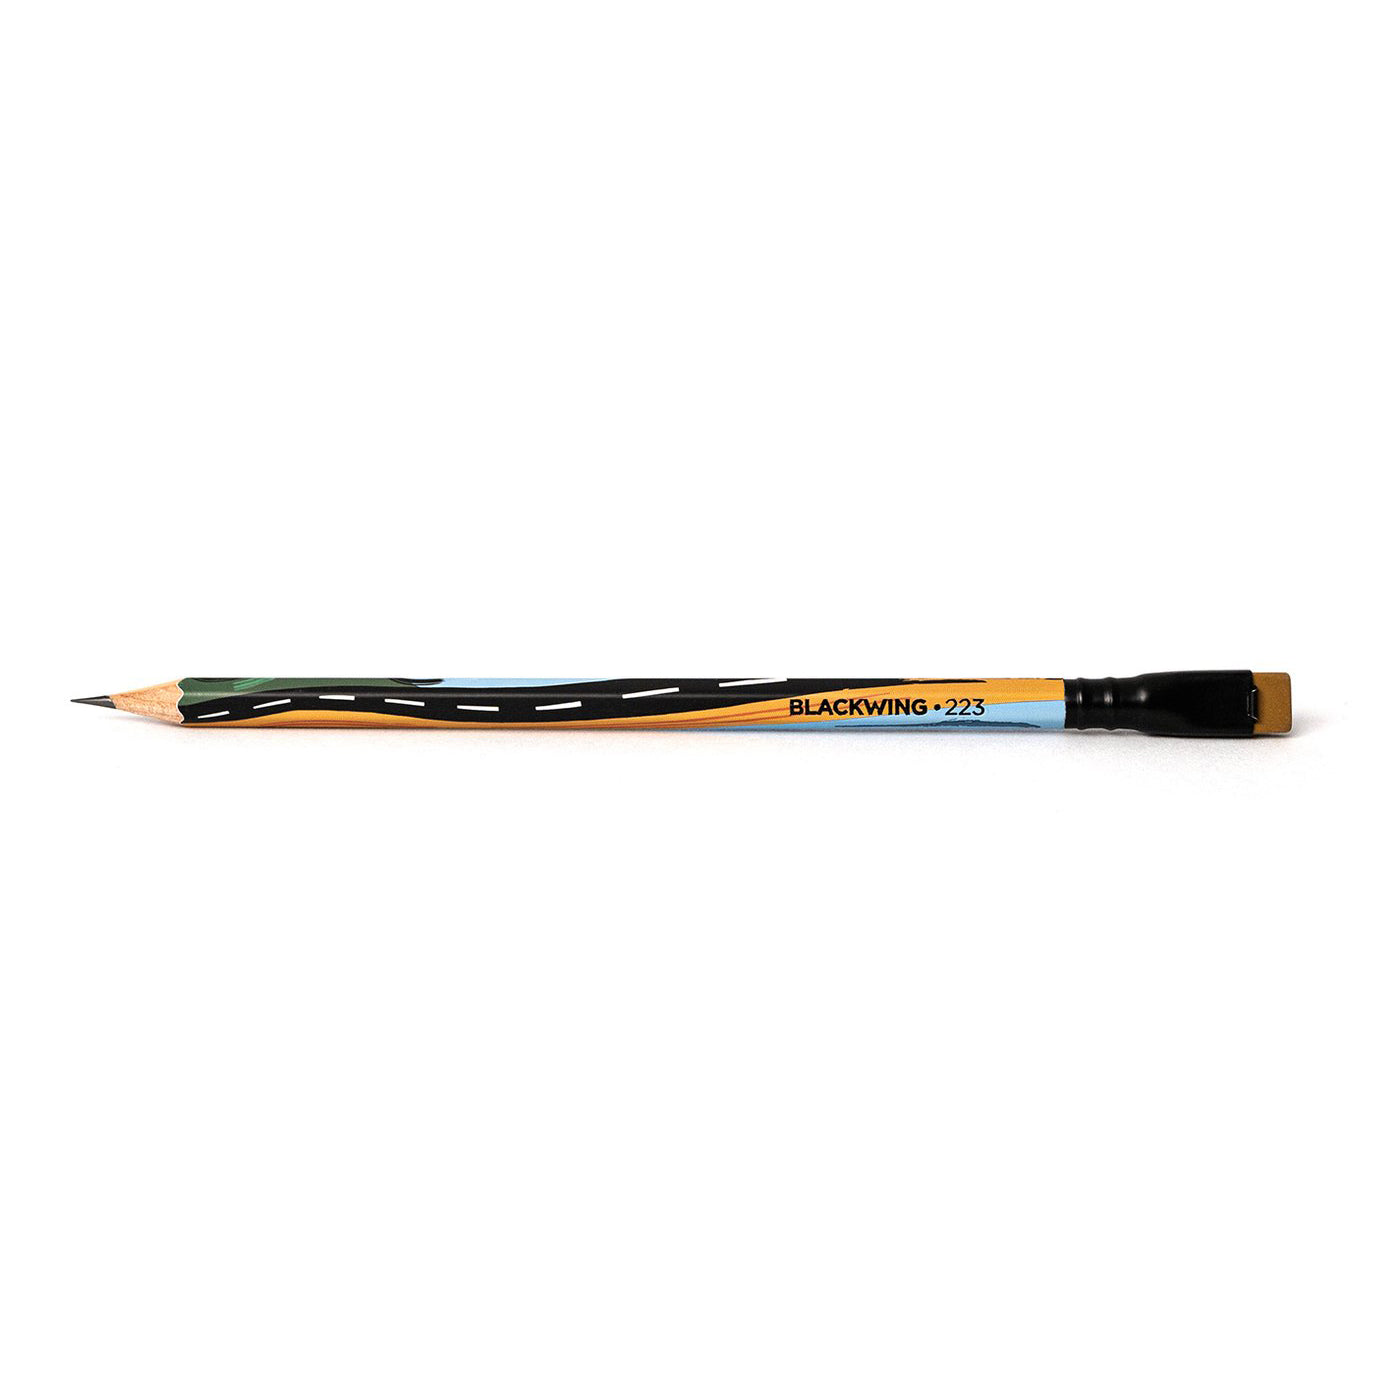 Blackwing Limited Edition Volume 223 - Box of 12 Pencils